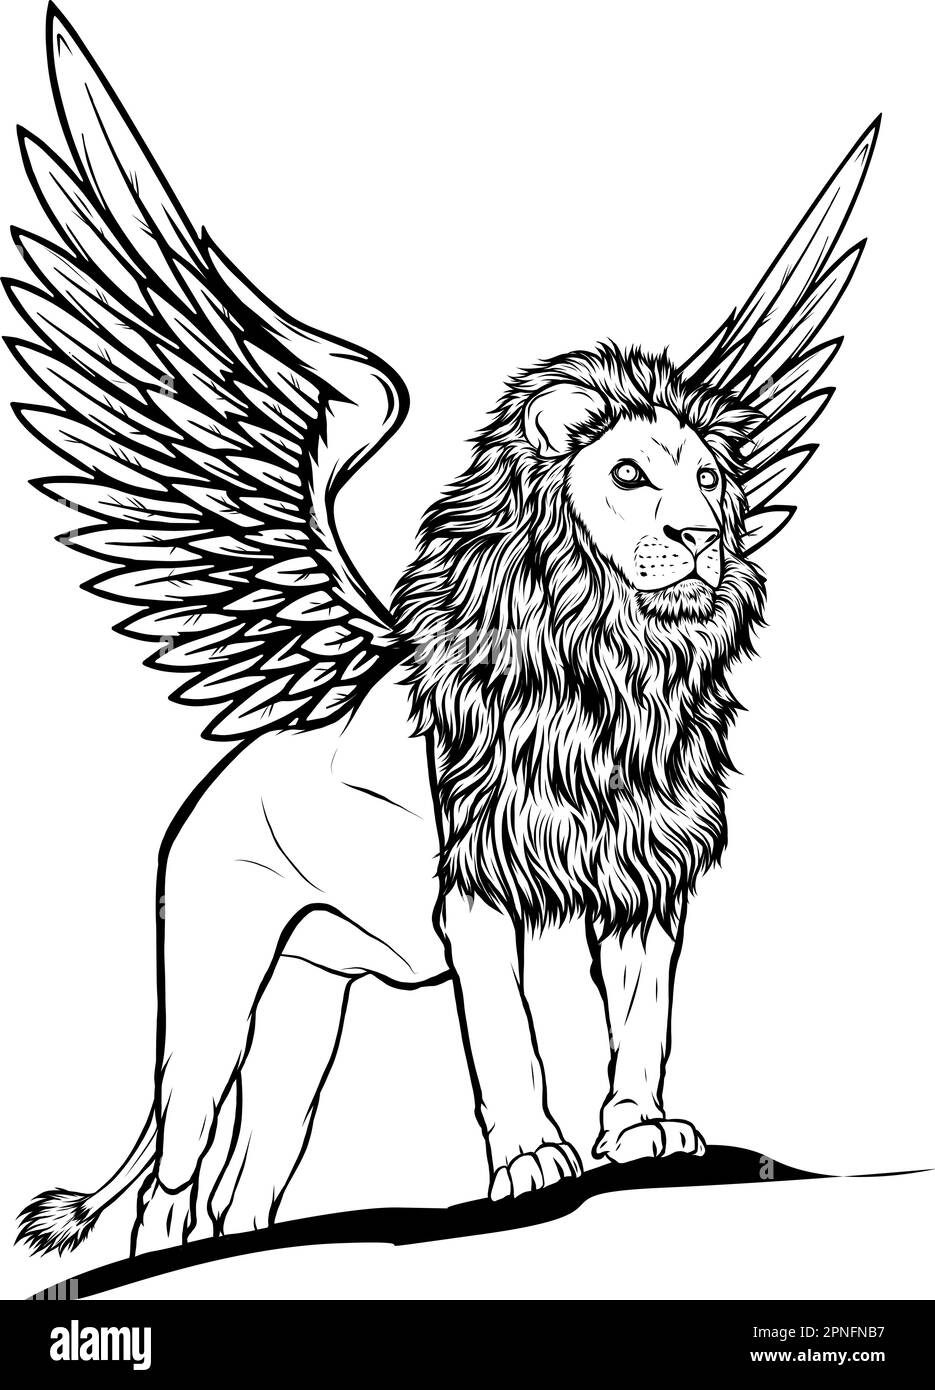 mythical winged lion vector illustration Stock Vector